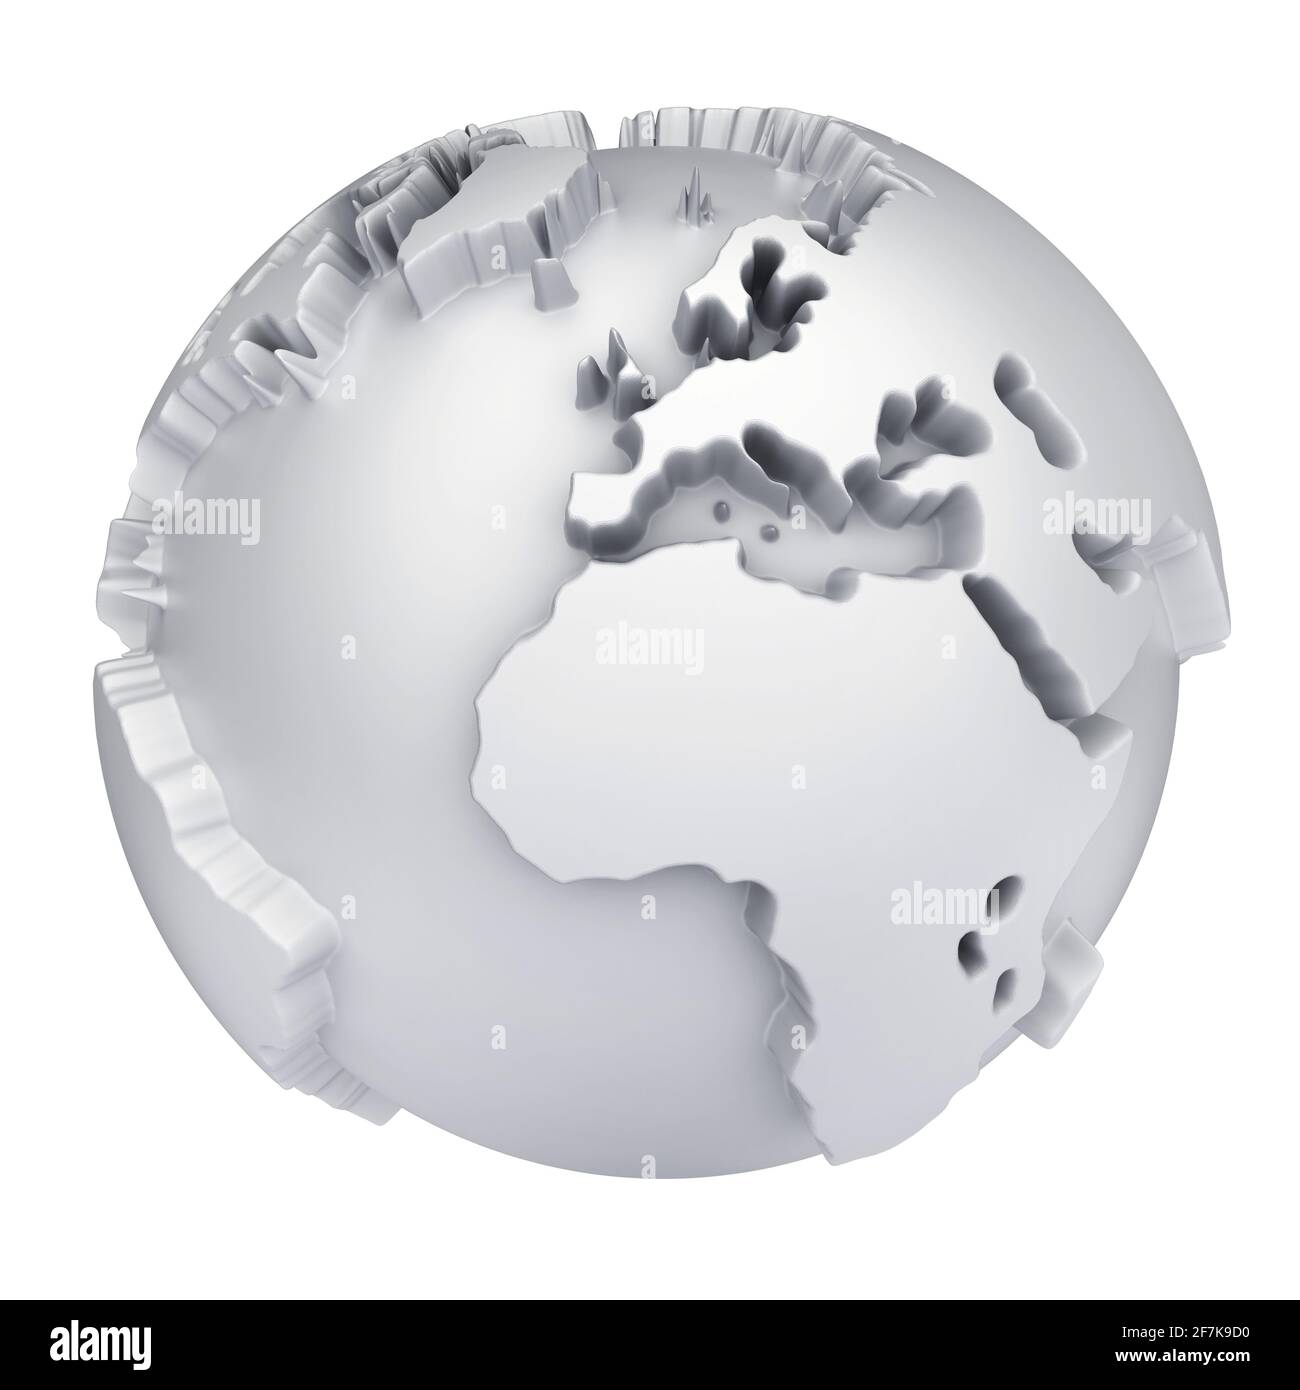 Earth world map. Africa and Europe on a planet globe. 3d concept illustration Stock Photo